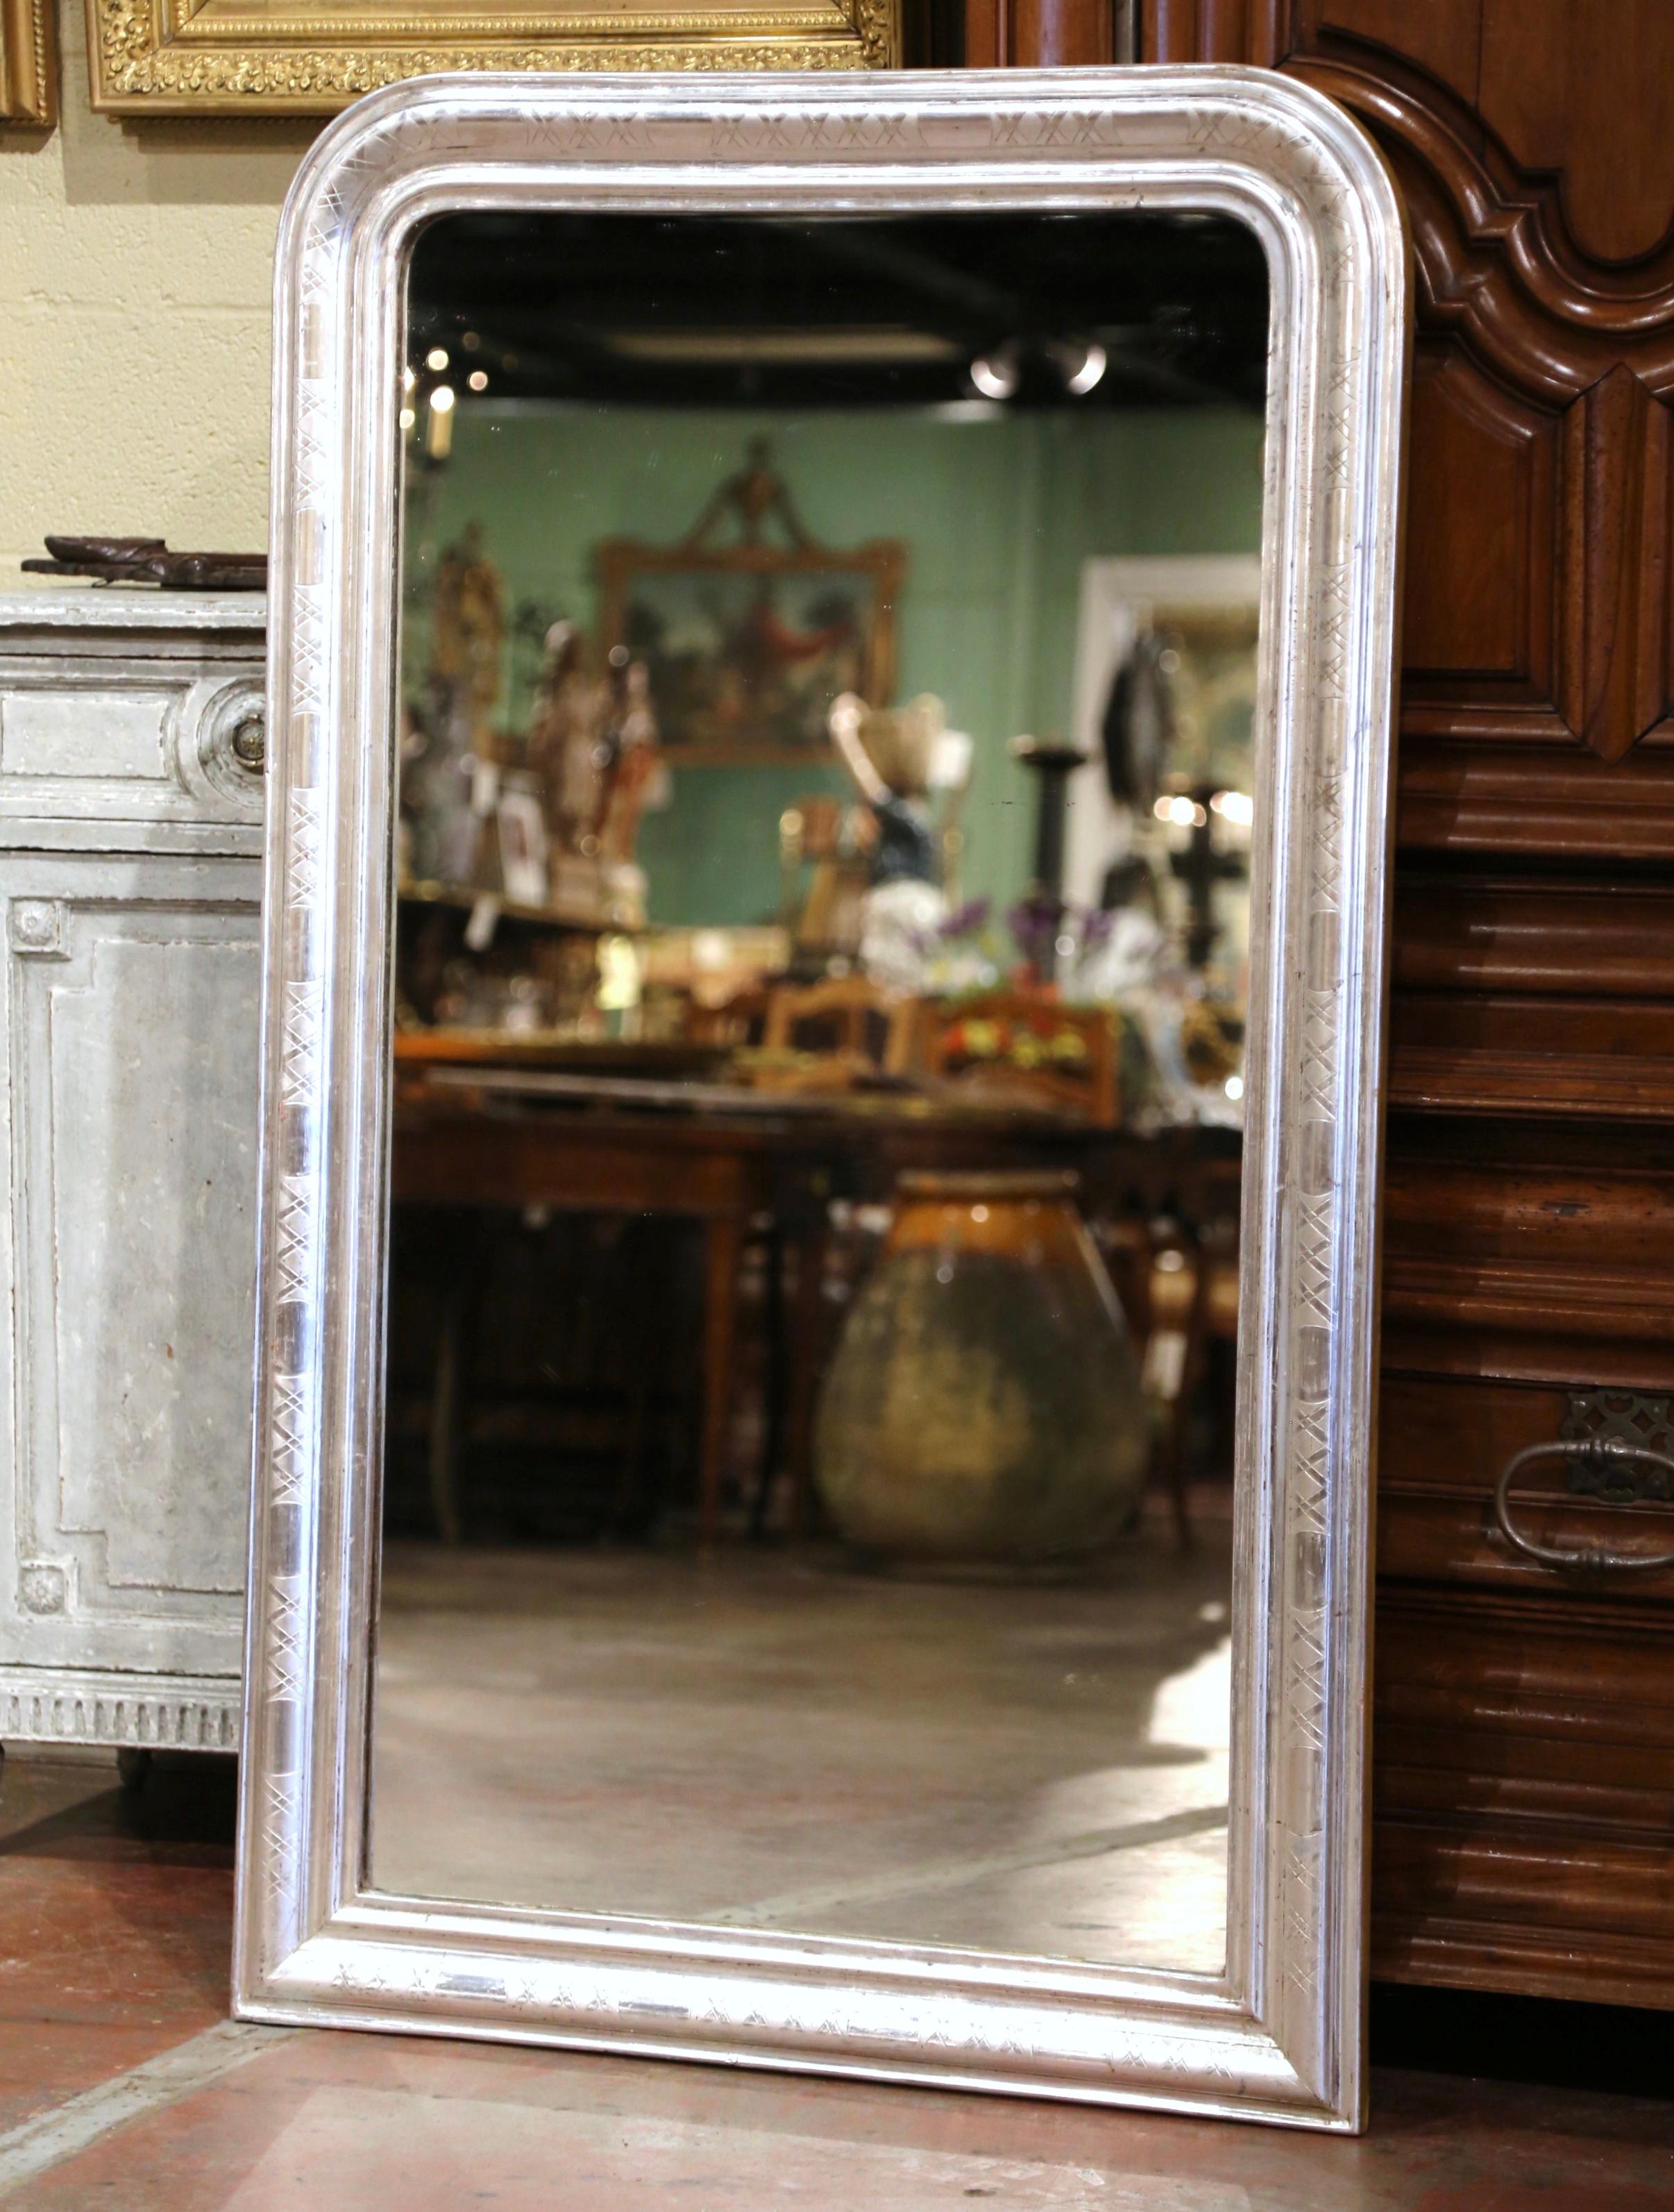 Crafted in the Burgundy region of France, circa 1880, the large antique mirror has traditional, timeless lines with rounded corners. The rectangular frame is decorated with a luxurious silver leaf finish over discrete engraved two-tone geometric